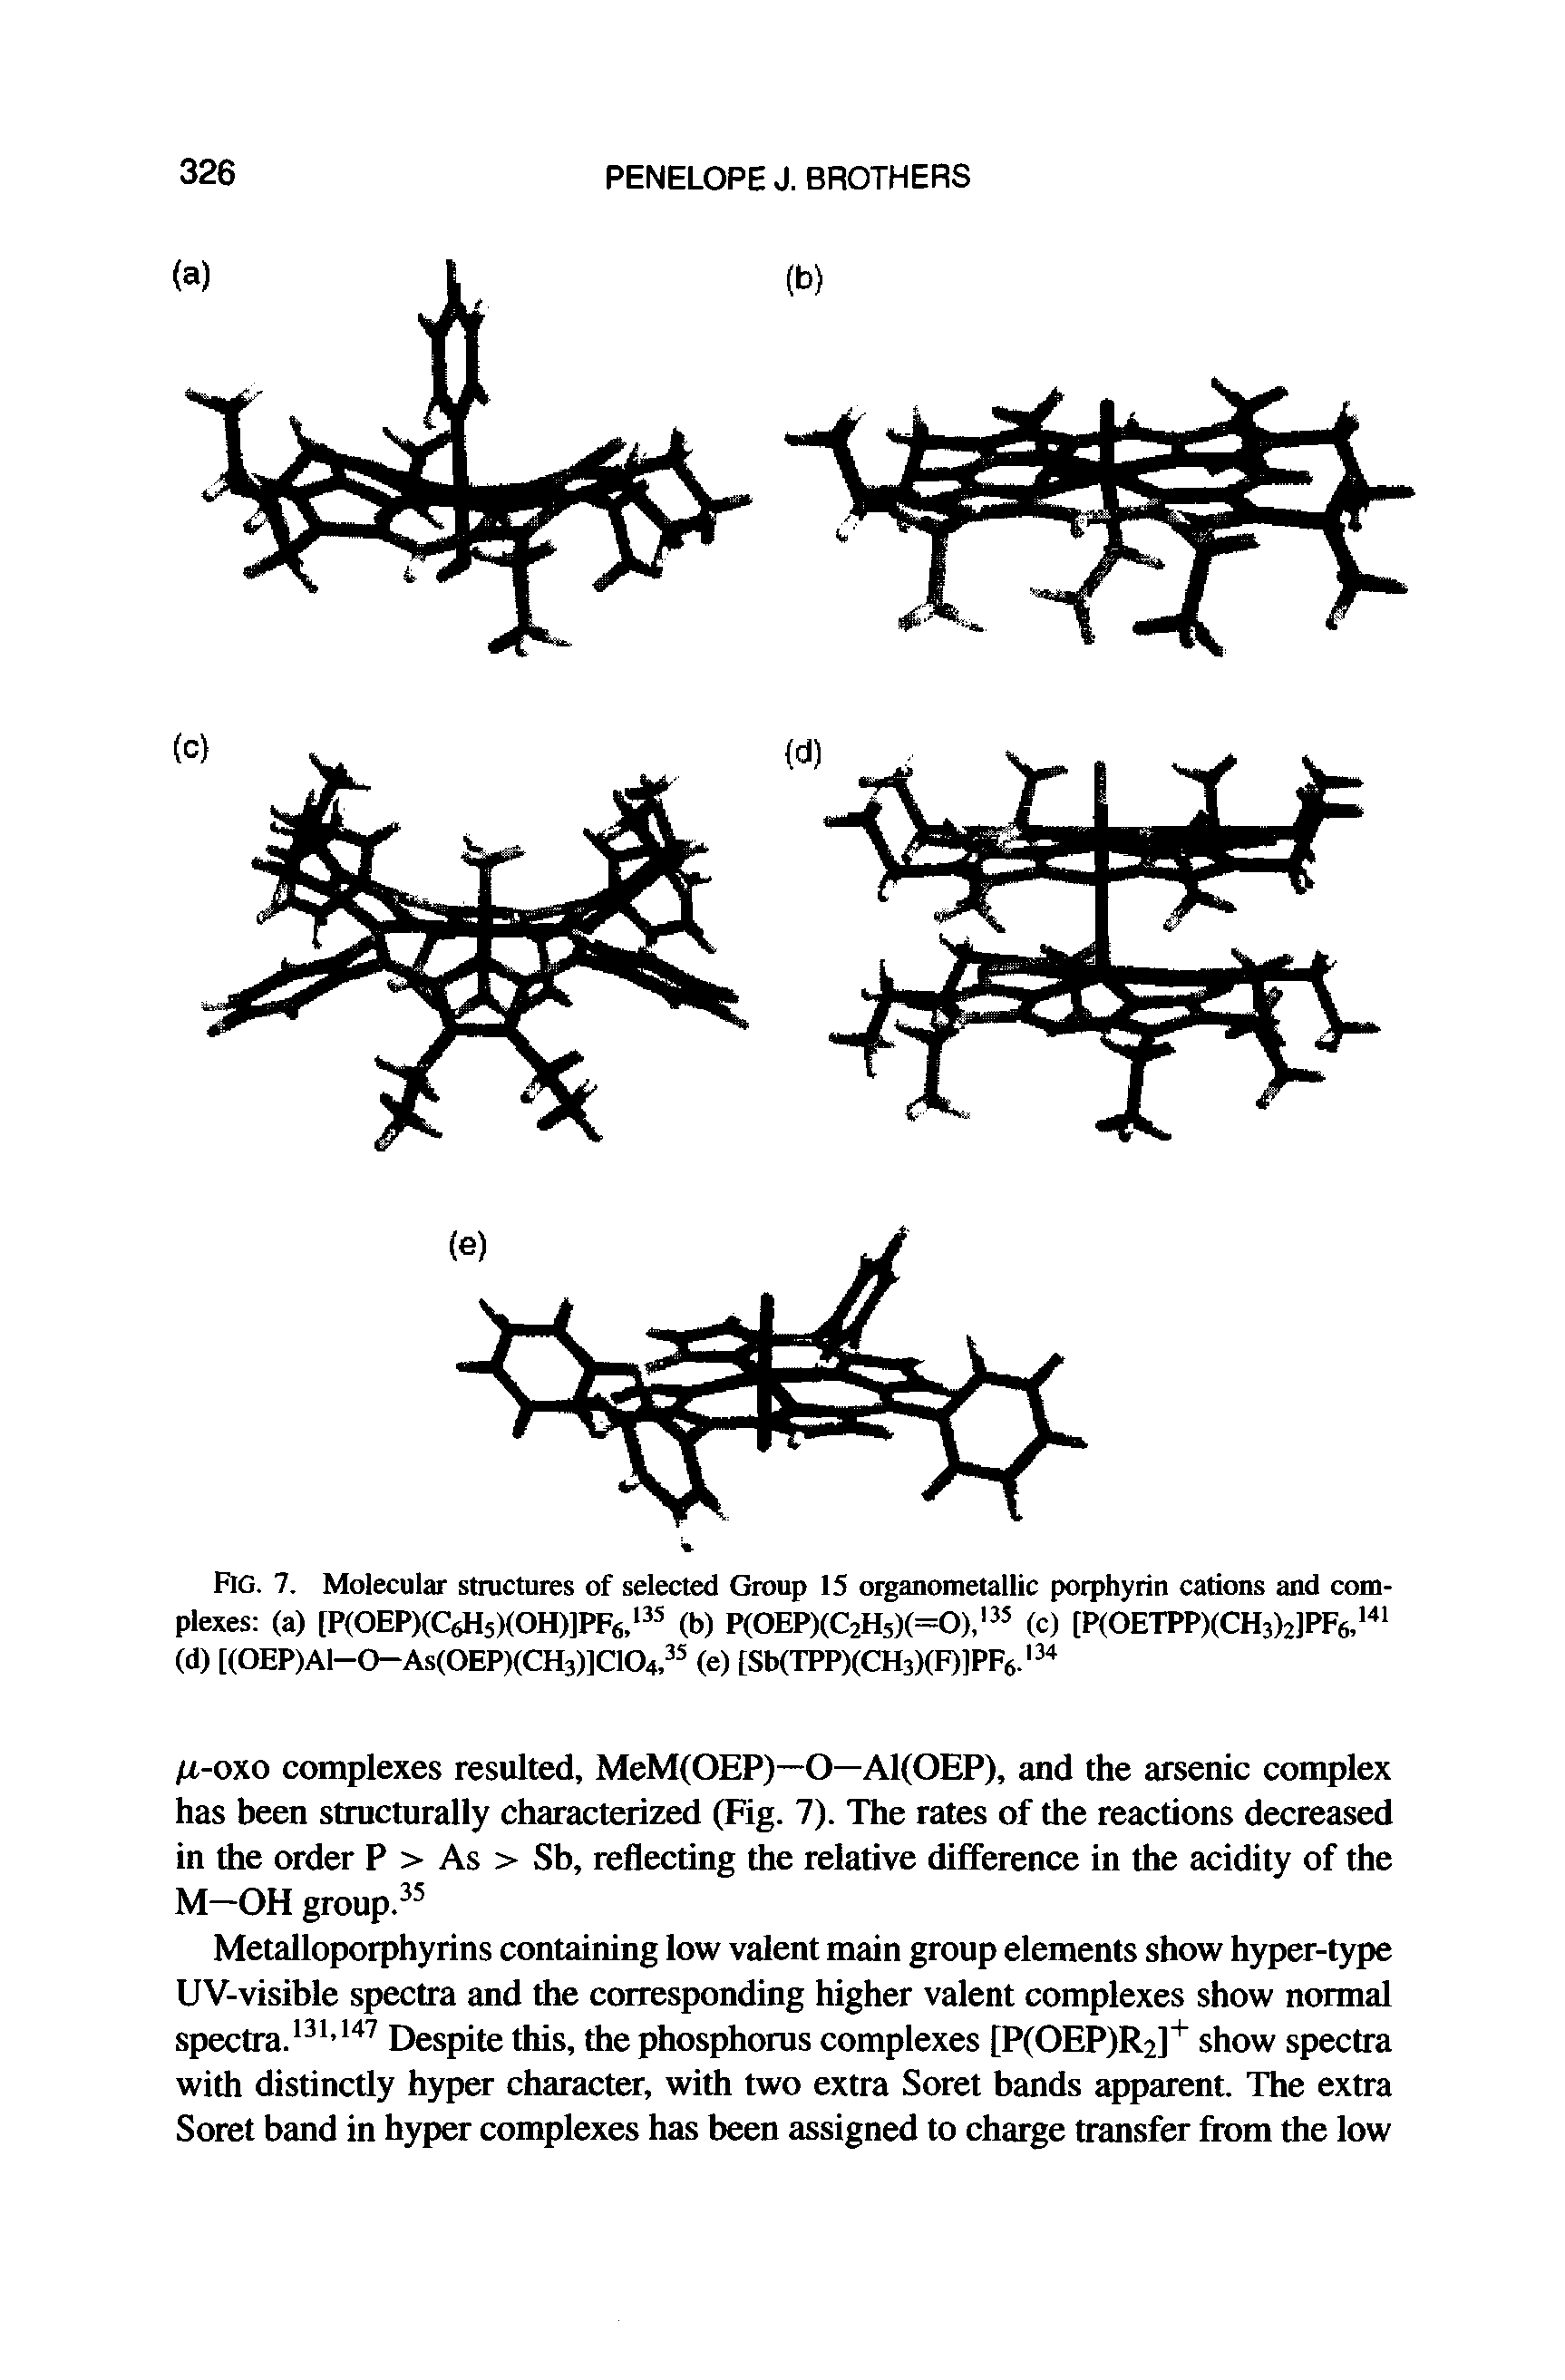 Fig. 7. Molecular structures of selected Group 15 organometallic porphyrin cations and complexes (a) [P(0EP)(C6H5)(0H)]PF6, (b) P(OEP)(C2H5)(=0), 5 [P(OETPP)(CH3)2]PF6, ...